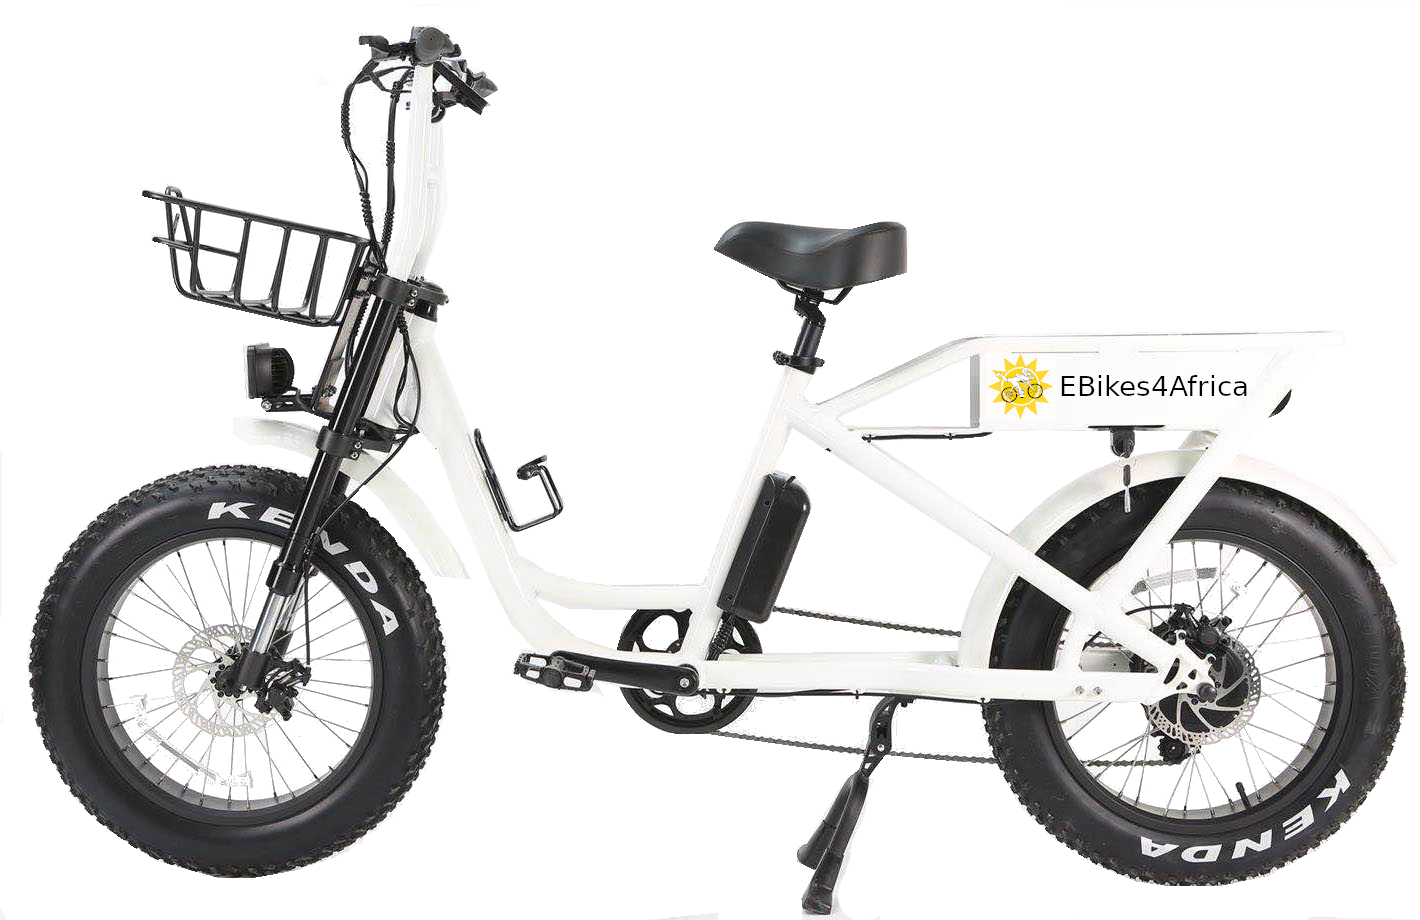 Gallery EBIKES4AFRICA 4